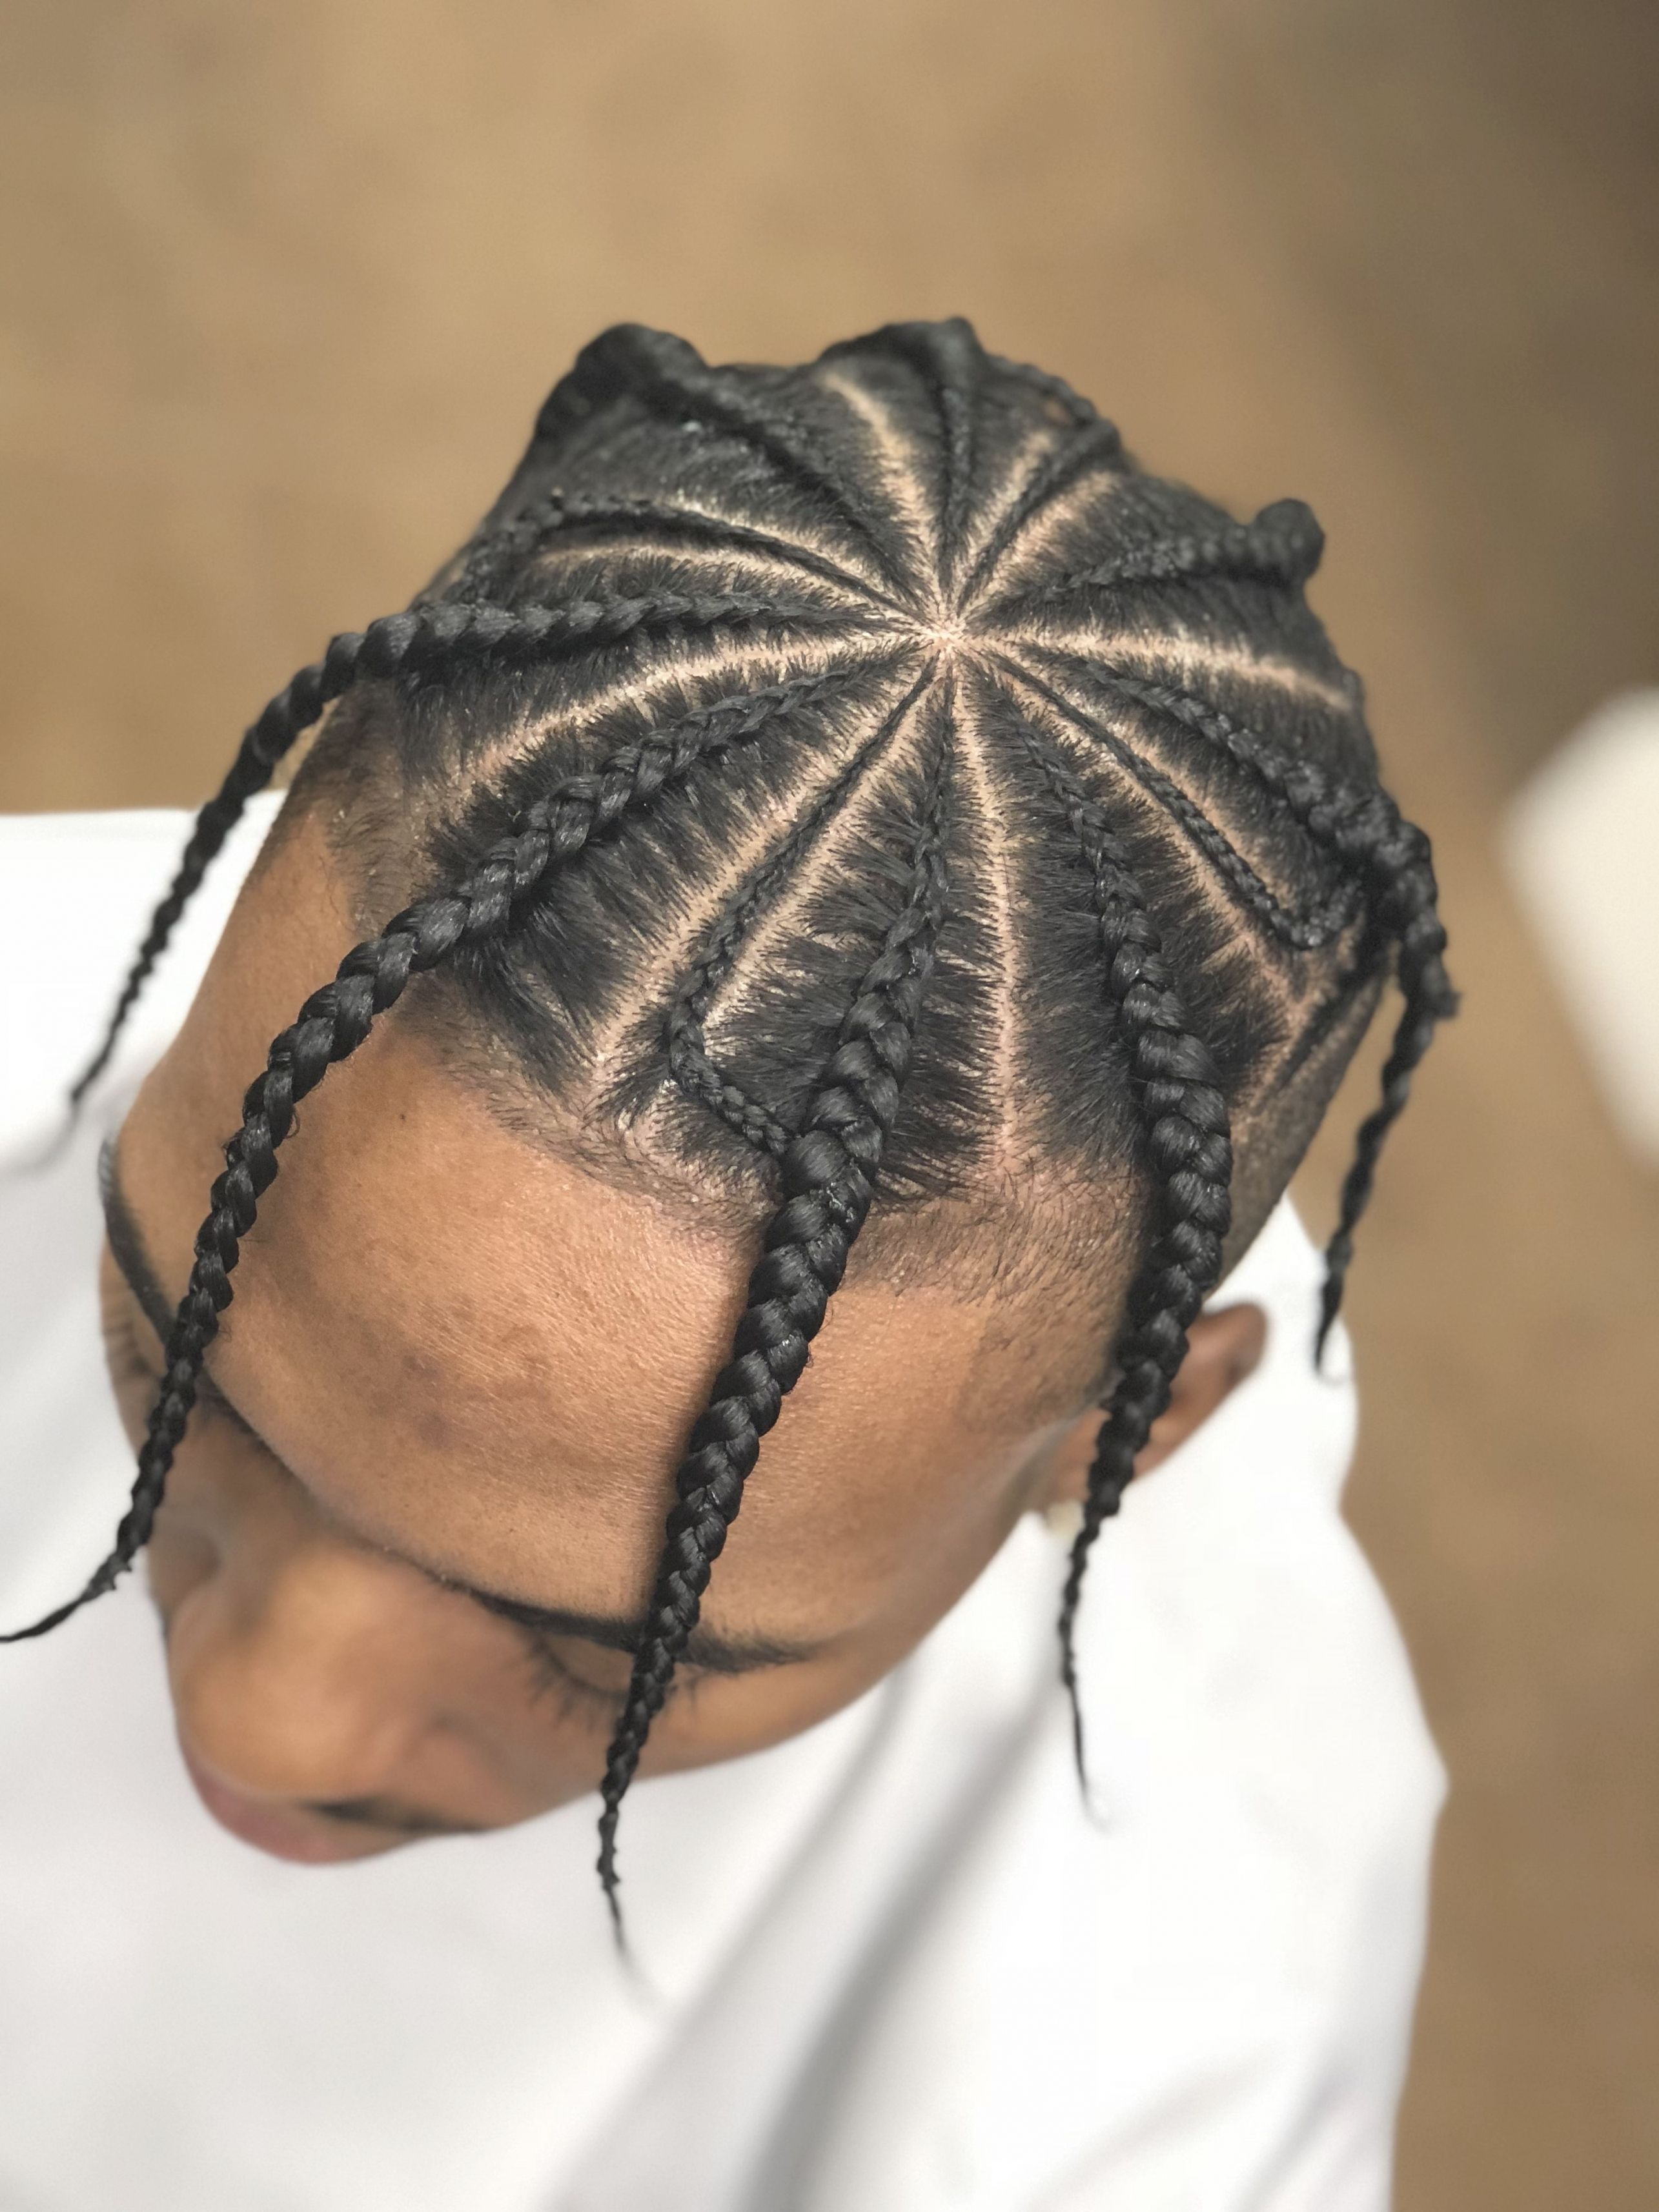 20+ Popular Mens Hairstyles Braids For 2019 Trends -   15 hairstyles Trenzas hombre ideas